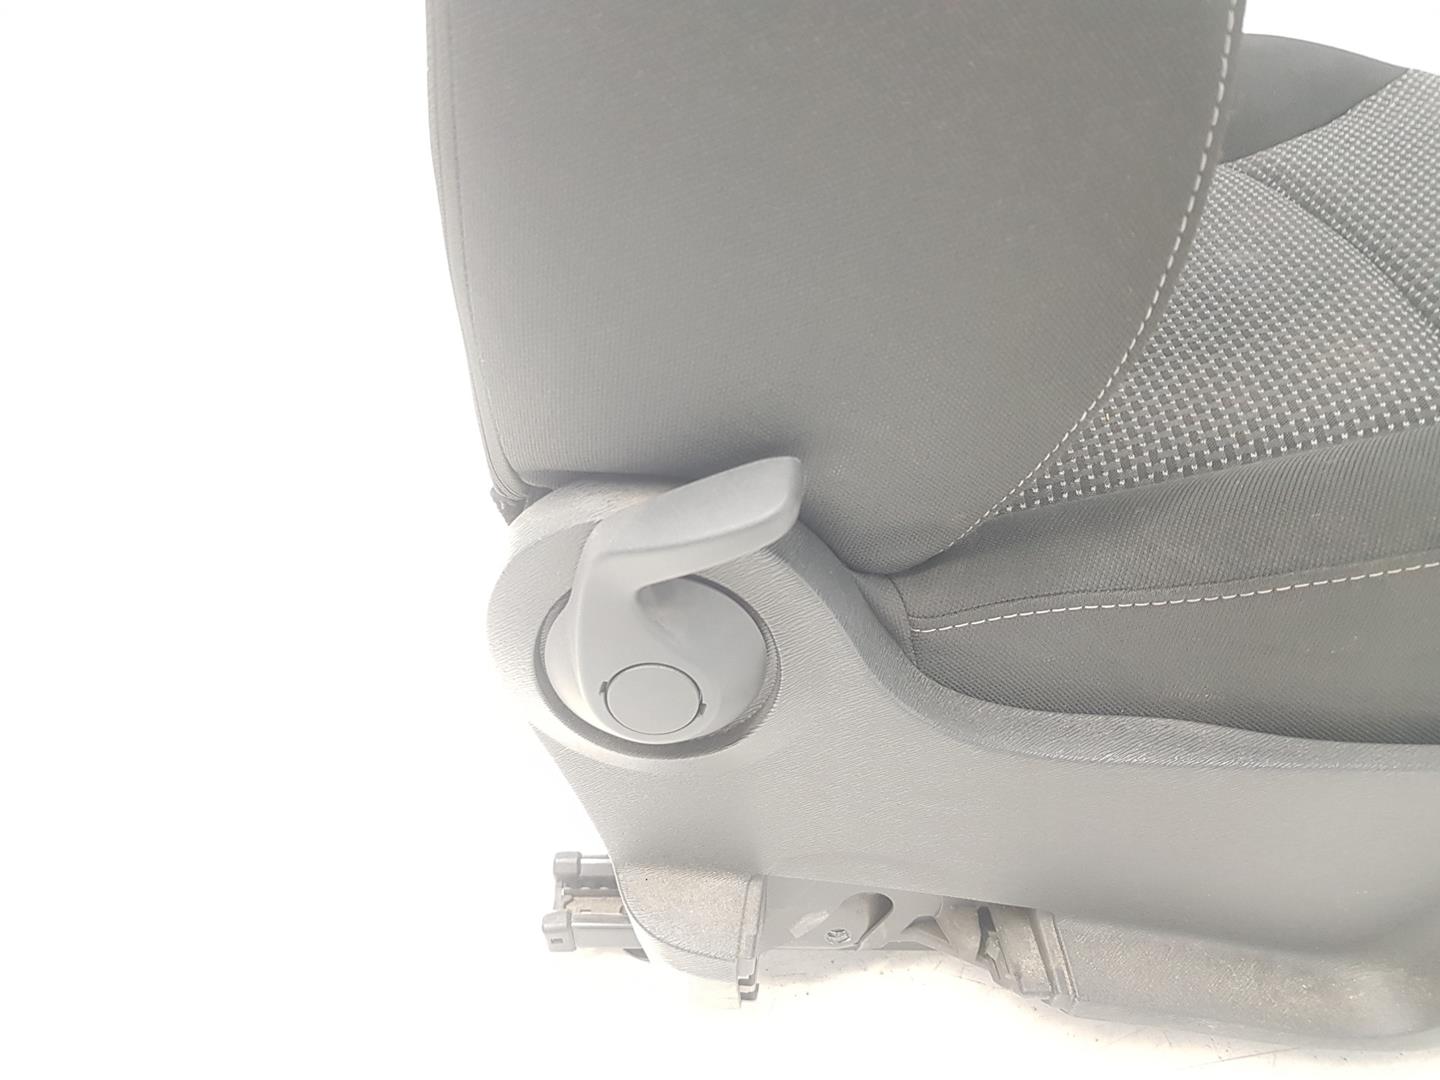 MERCEDES-BENZ Citan W415 (2012-2021) Front Right Seat ASIENTOTELA, ASIENTOACOMPAÑANTE 24137982